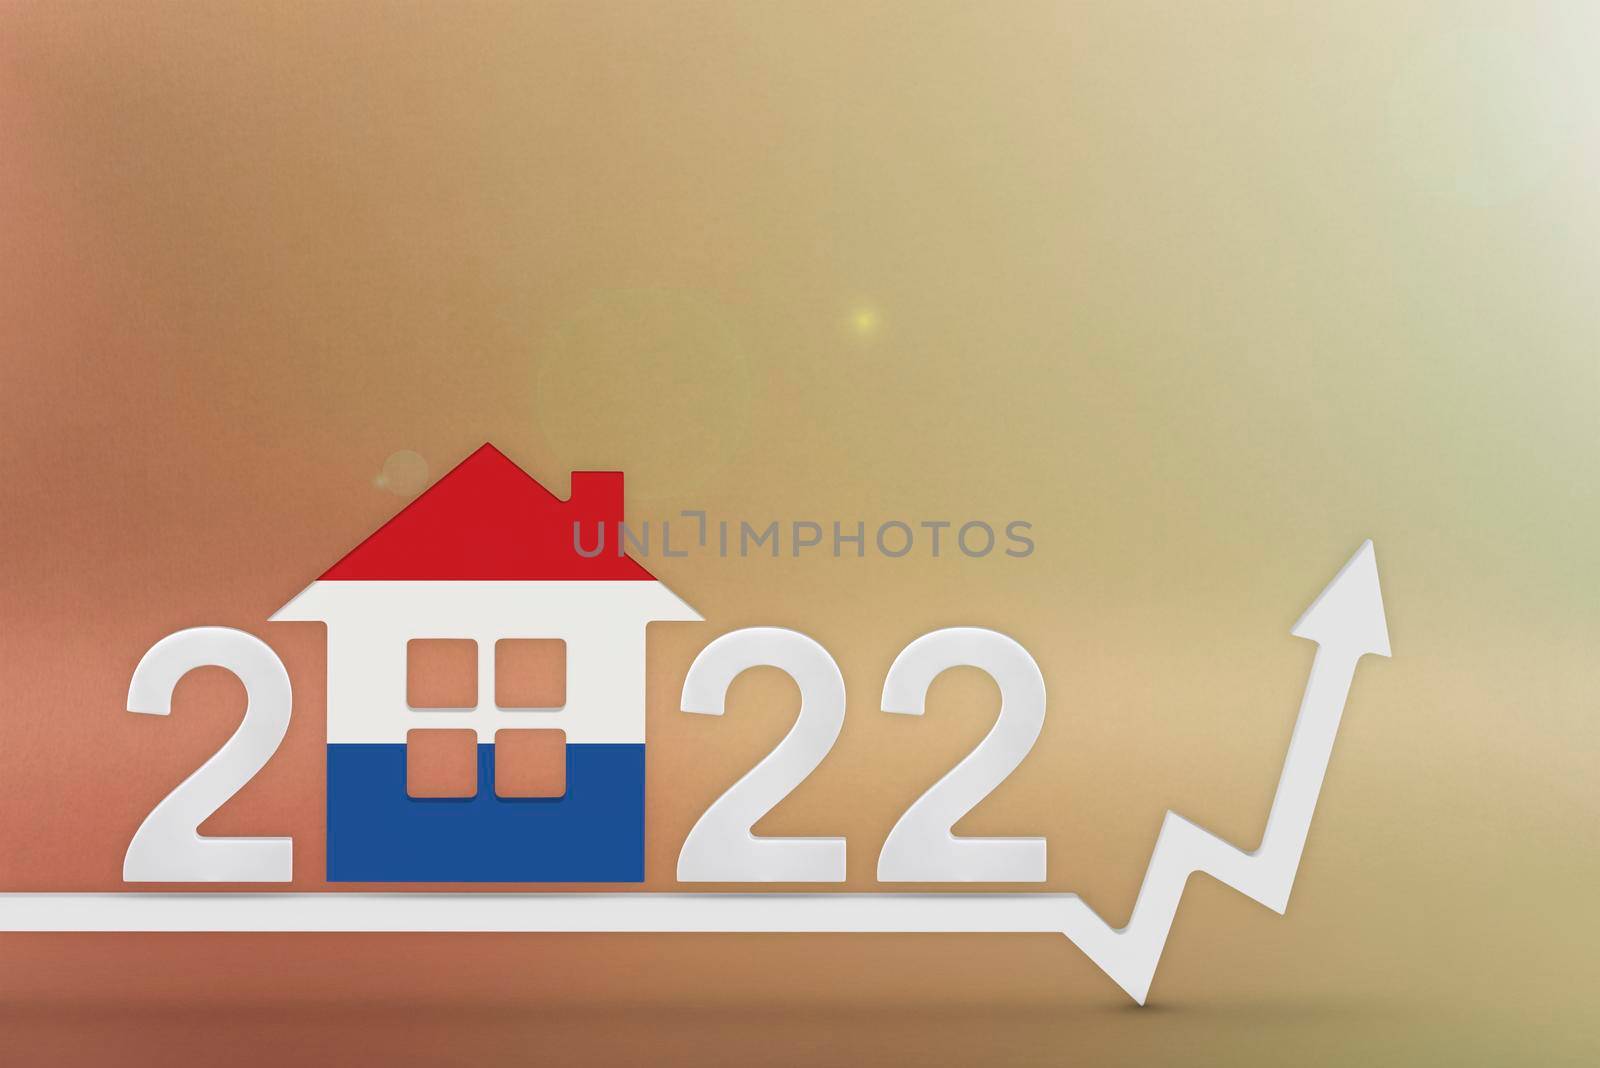 The cost of real estate in Netherlands in 2022. Rising cost of construction, insurance, rent in Netherlands. 3d house model painted in flag colors, up arrow on yellow background.